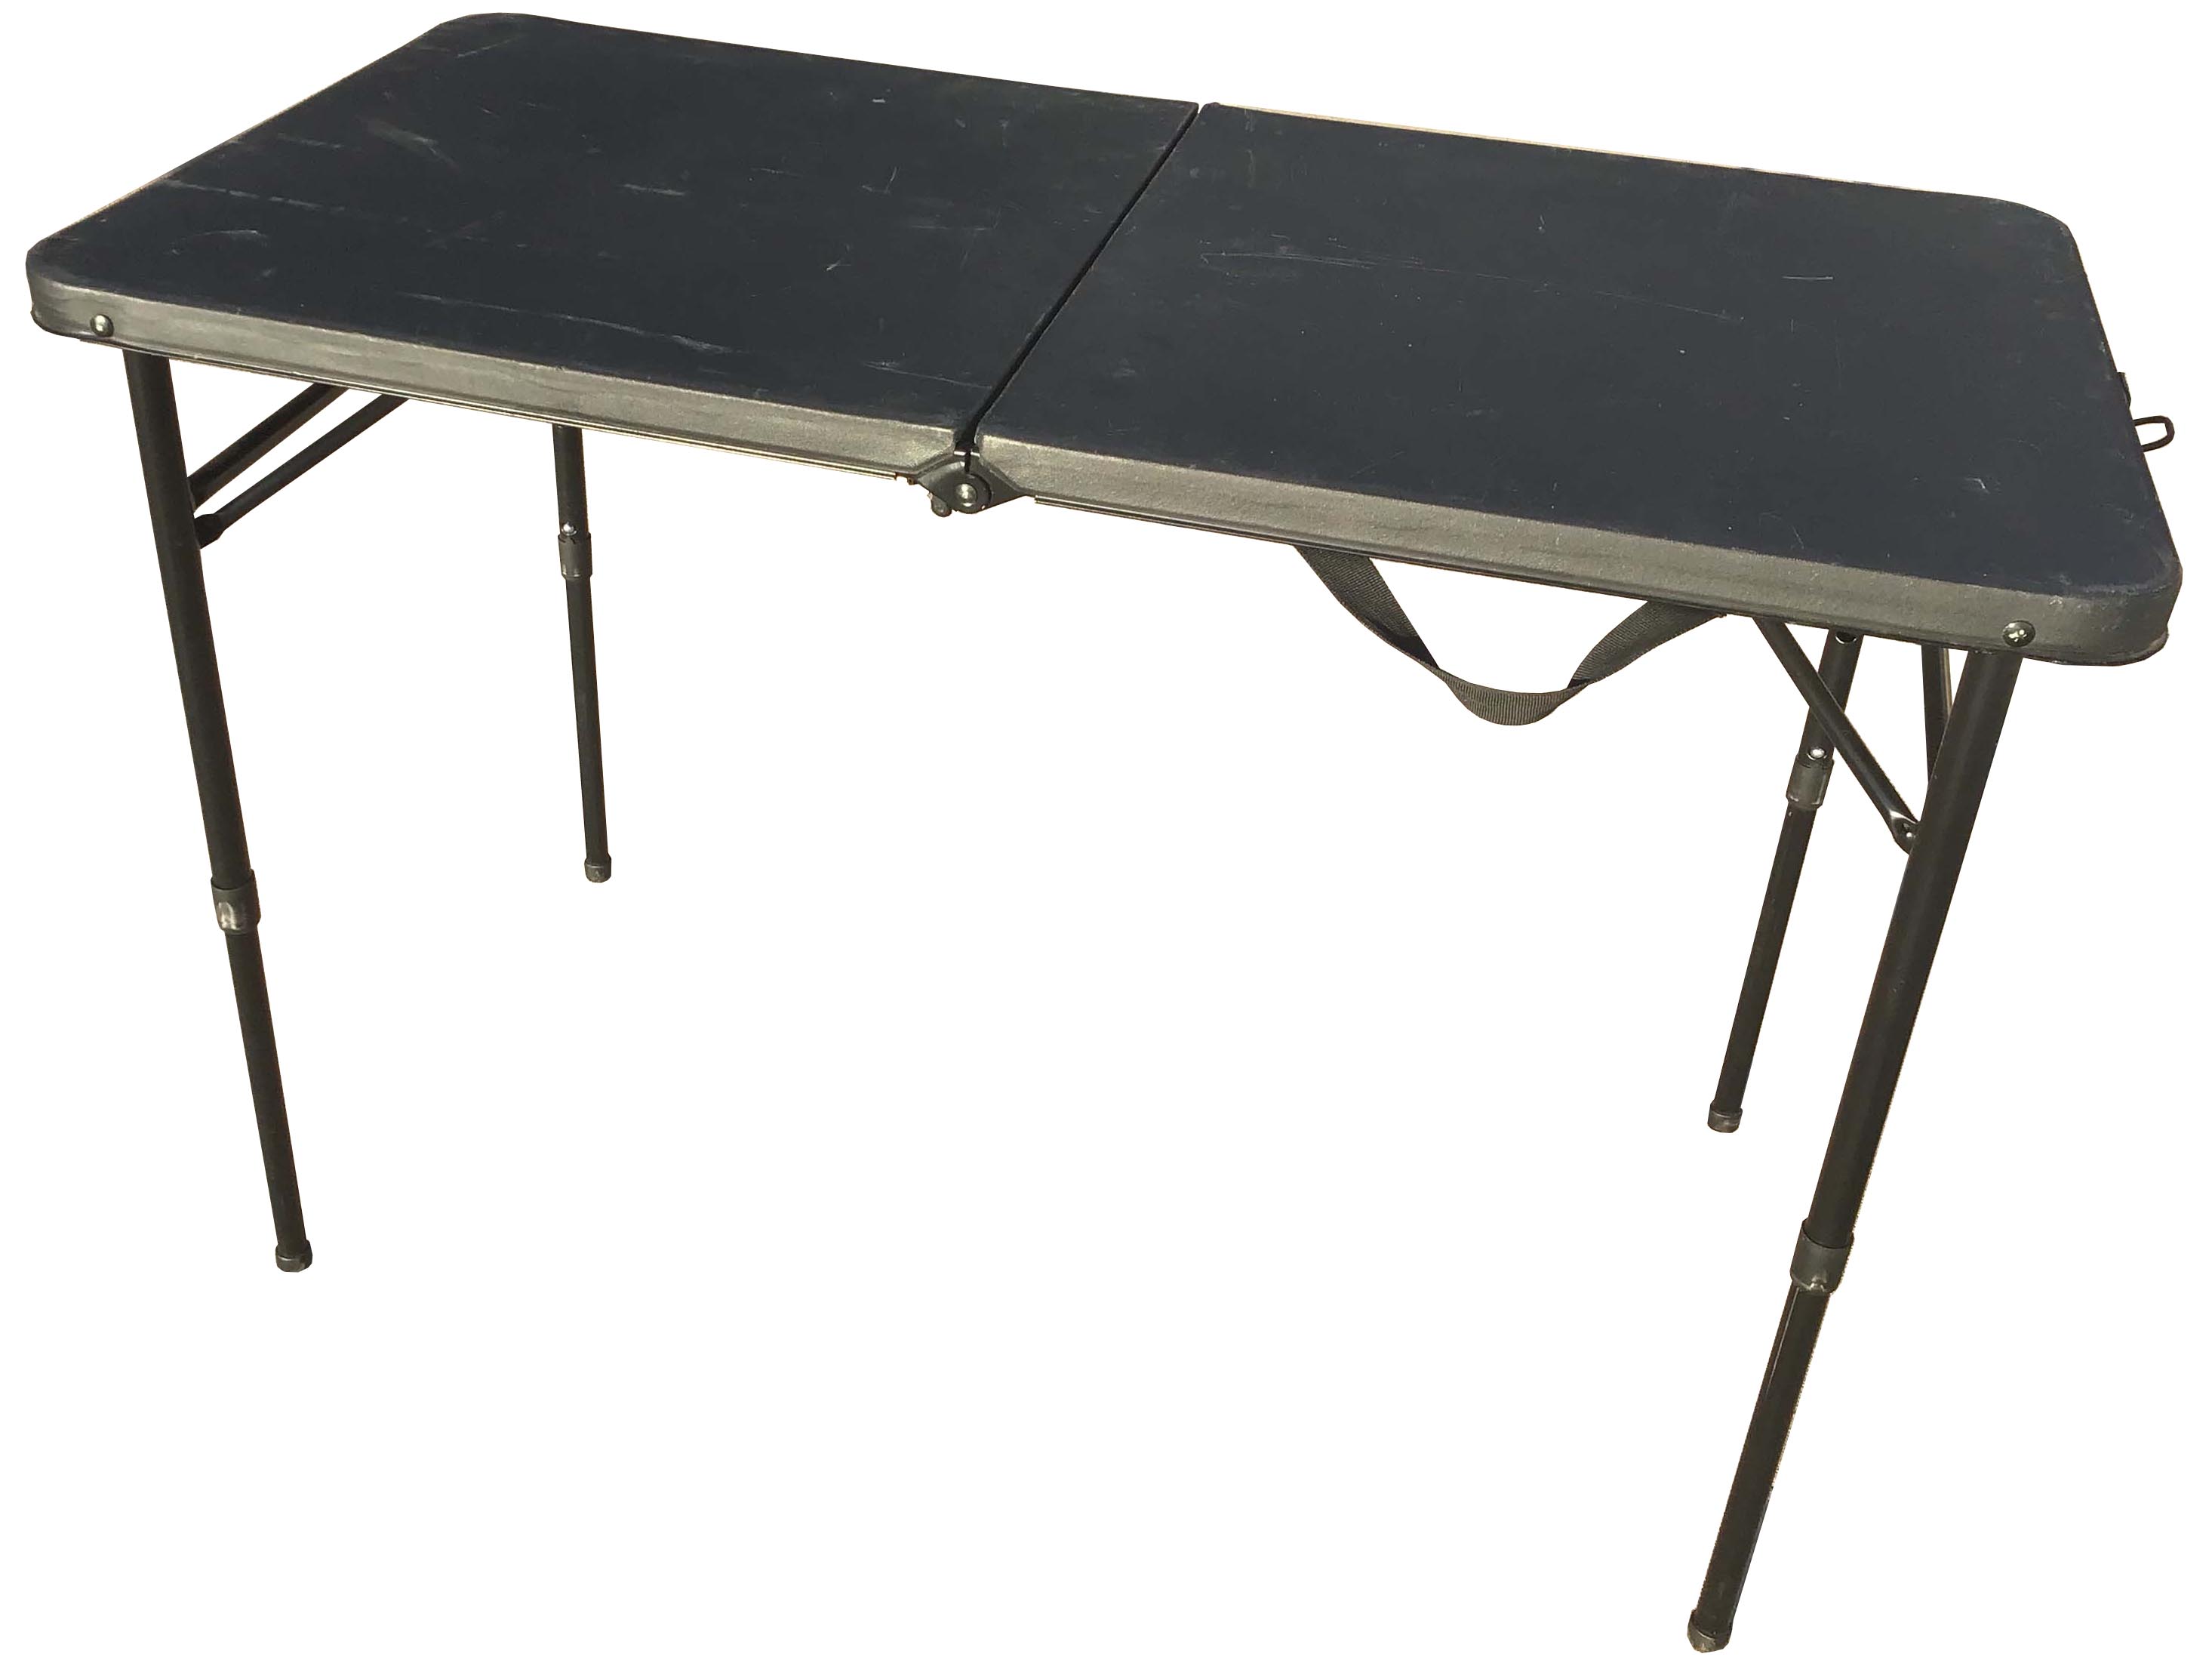 40 inch rectangle tables (adjustable height)